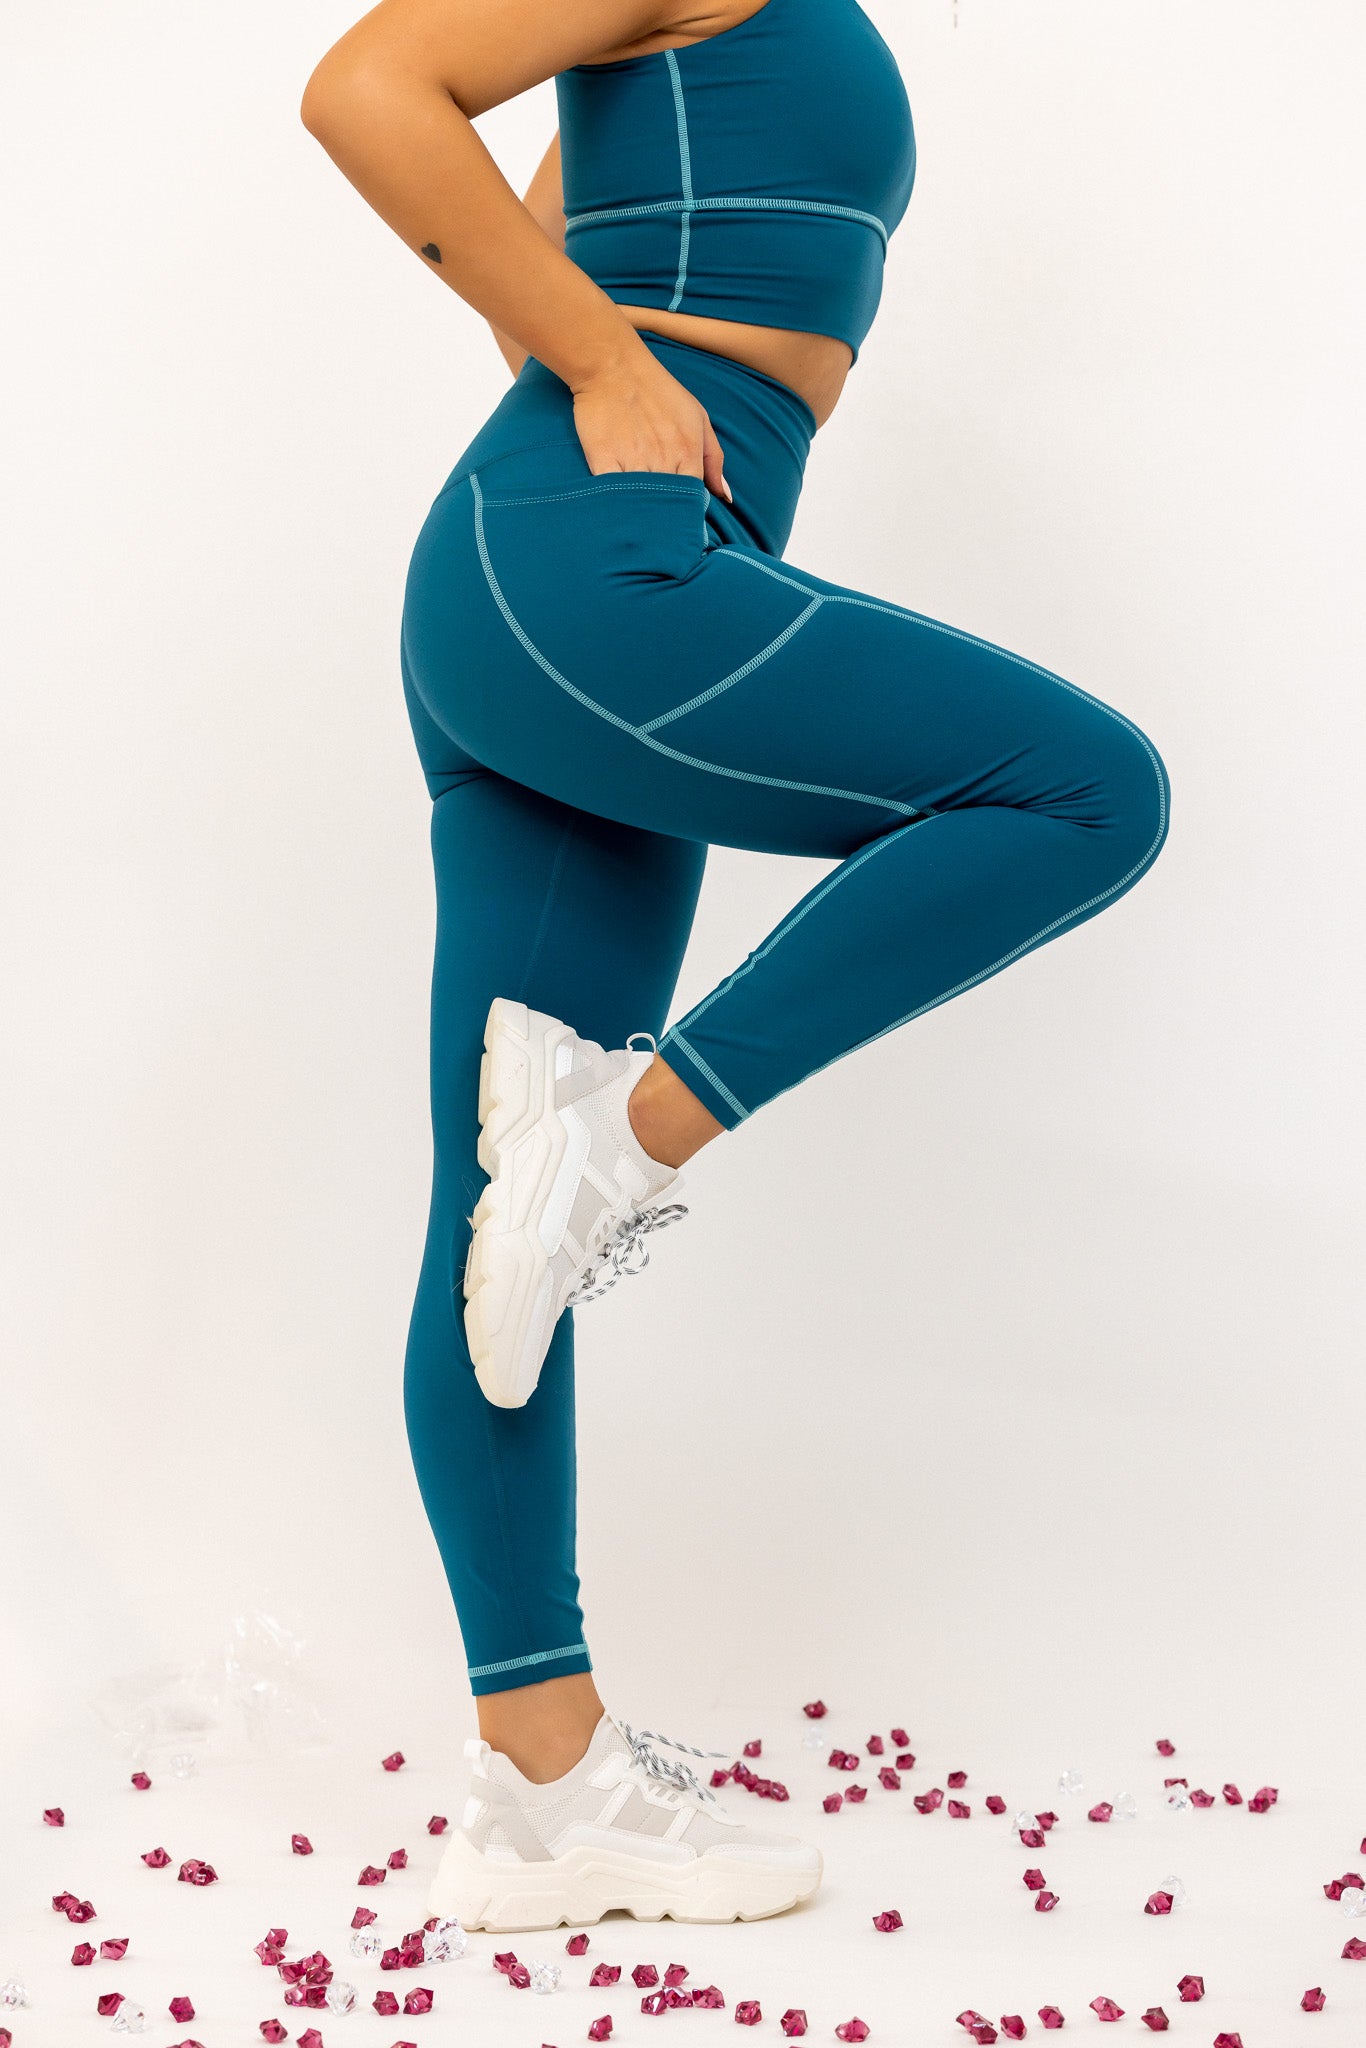 Women's Active Leggings Featuring Star Accents Down the Sides. (6